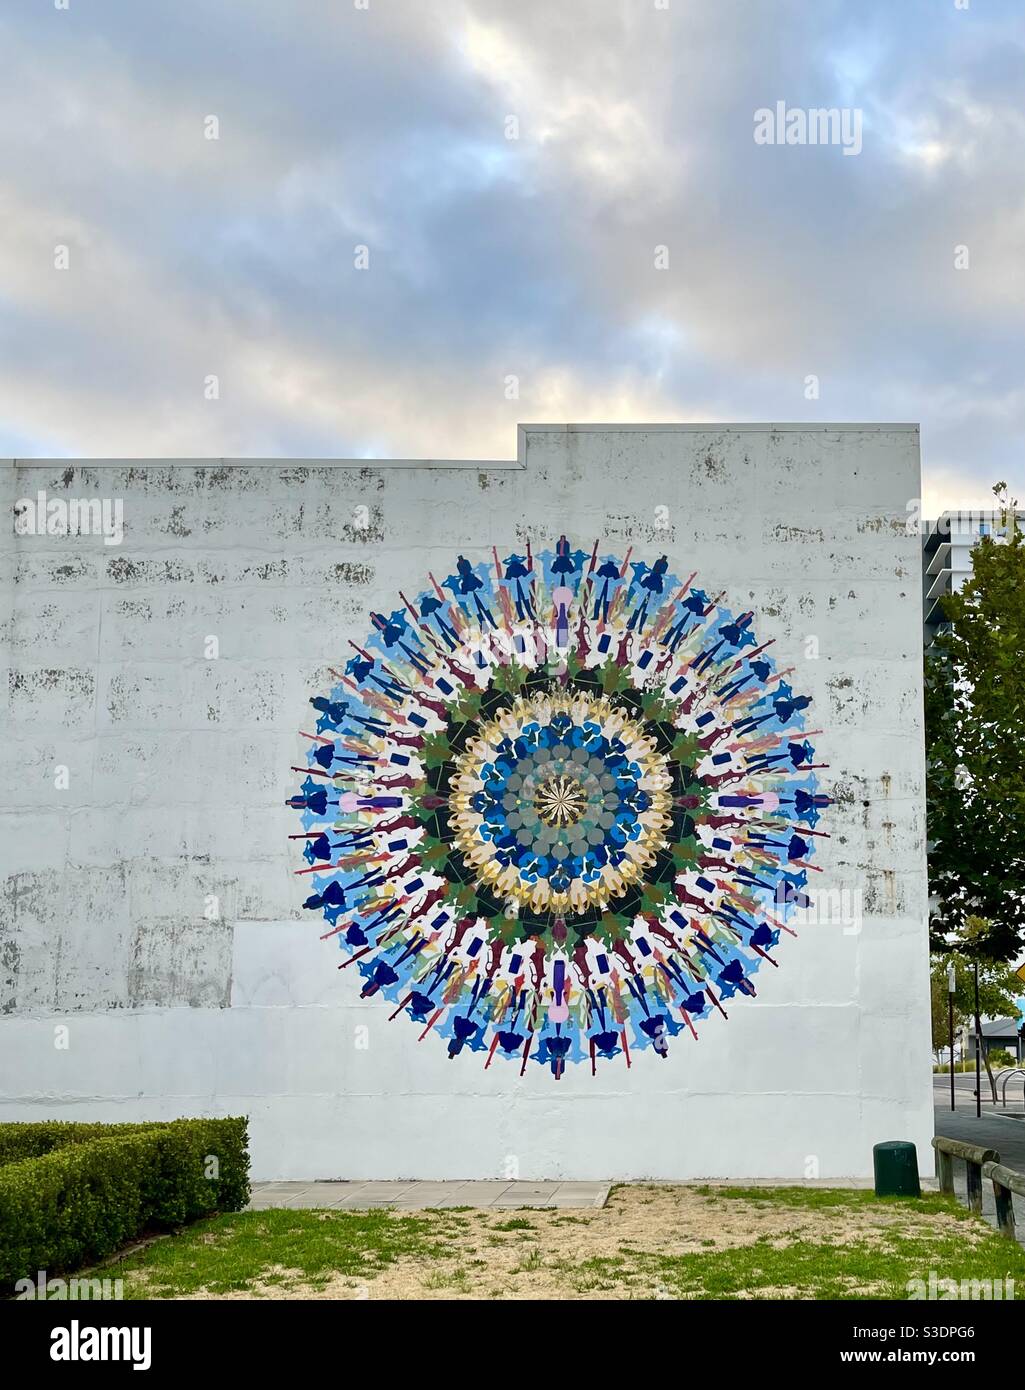 Circular Mural On Wall Of Central Institute Of Technology Central TAFE Perth Western Australia